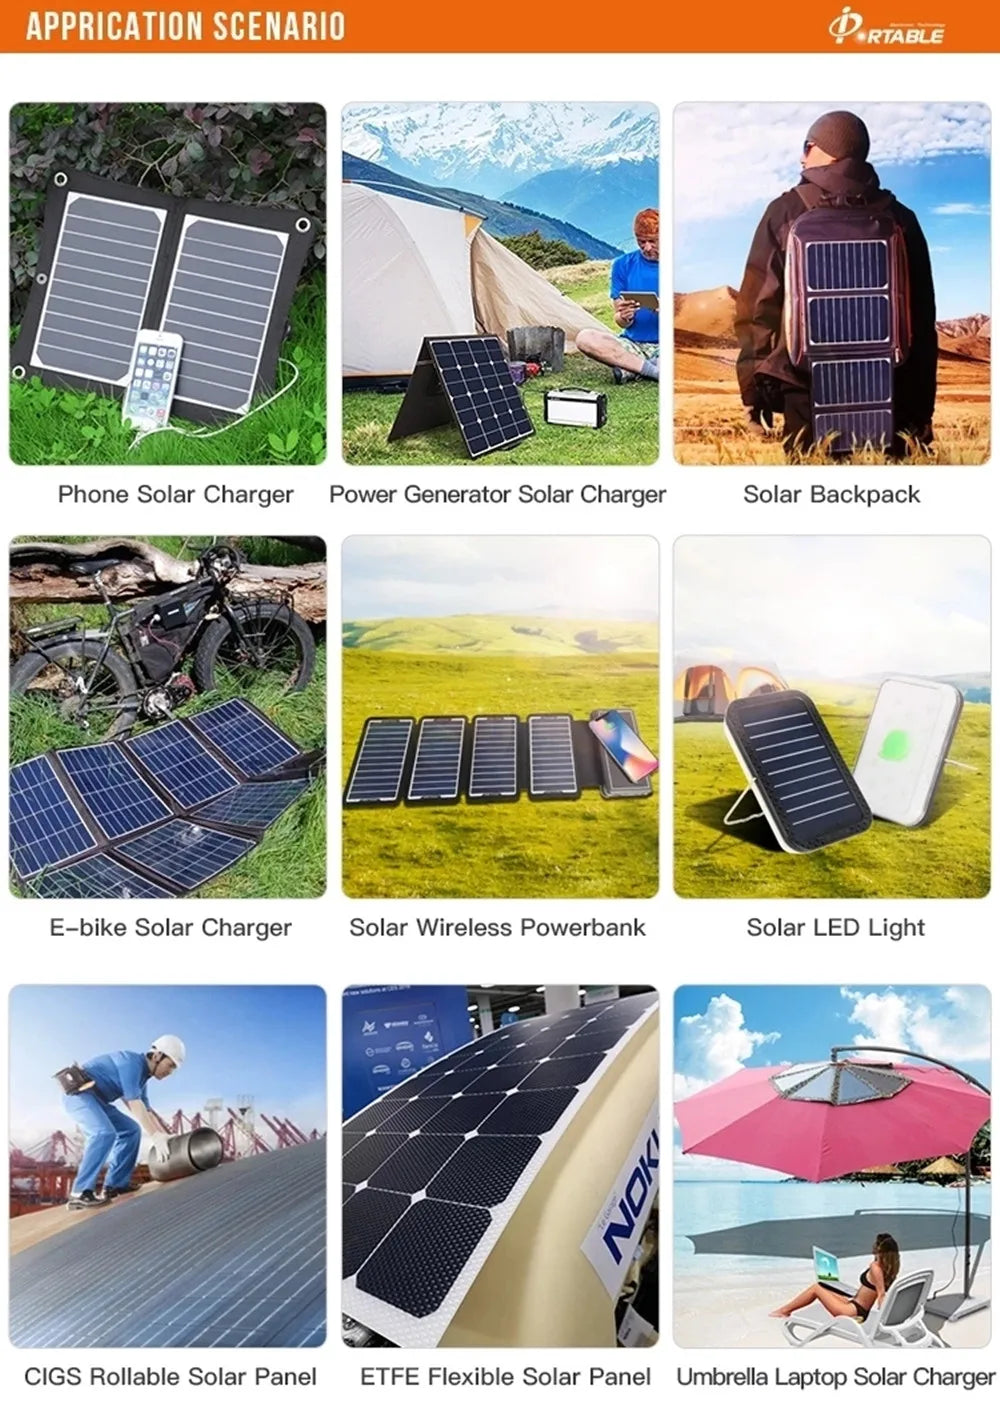 400W 300W 200W 100W Solar Panel, Flexible mono solar panels for home, roof, and boat charging with waterproof design.